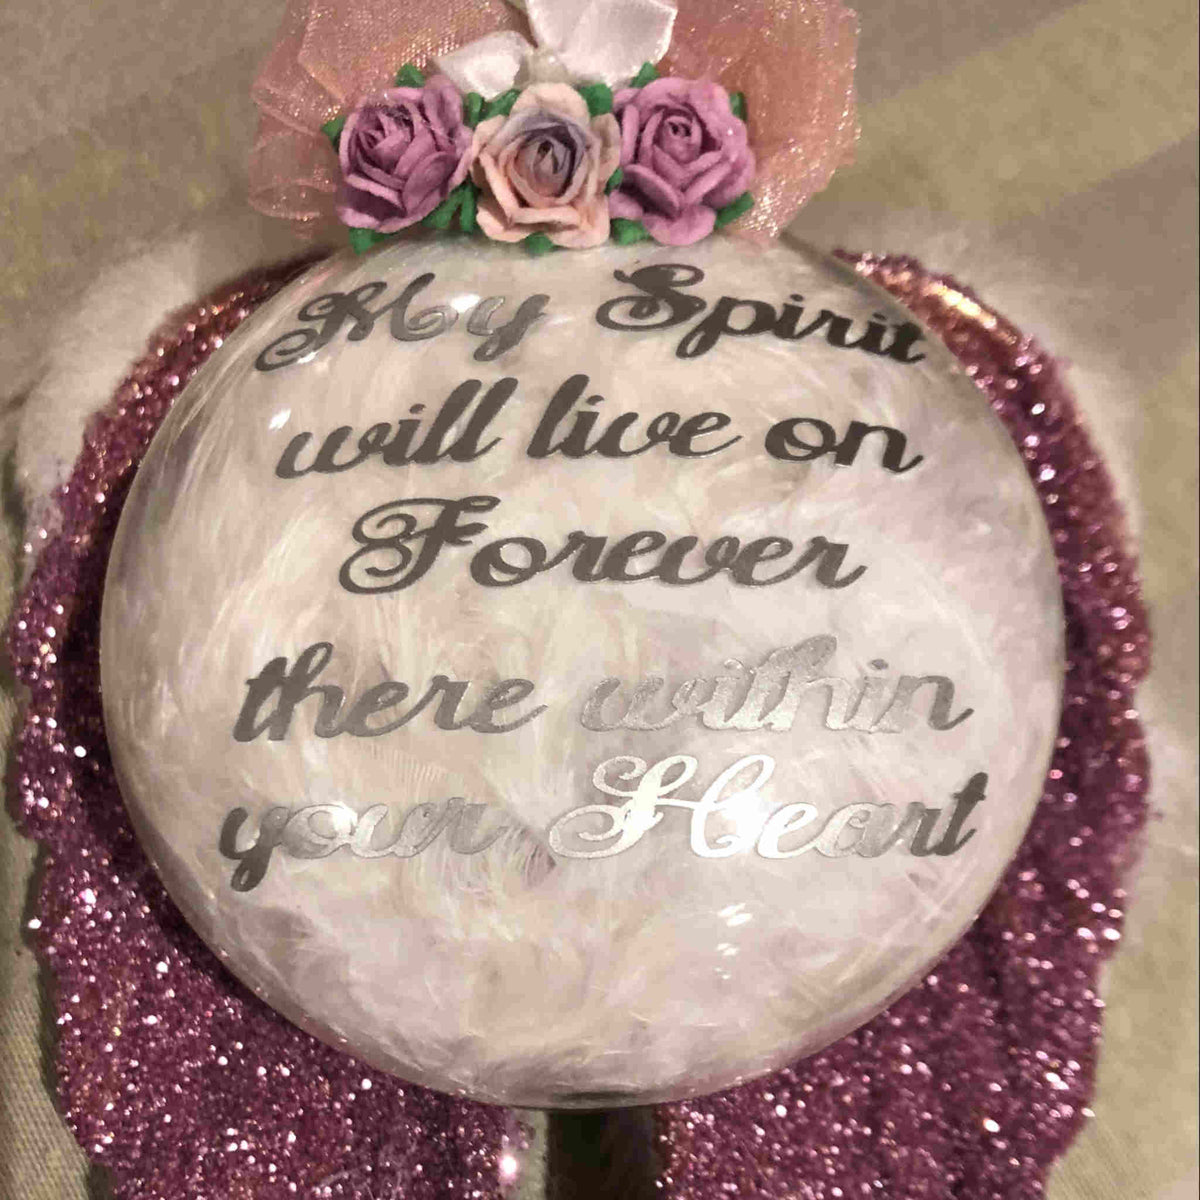 These acrylic ornaments are made in a variety of colors with custom verses, and adorned with glitter, feathers, fur, charms, flowers, or other decorative elements dependent on your selection.